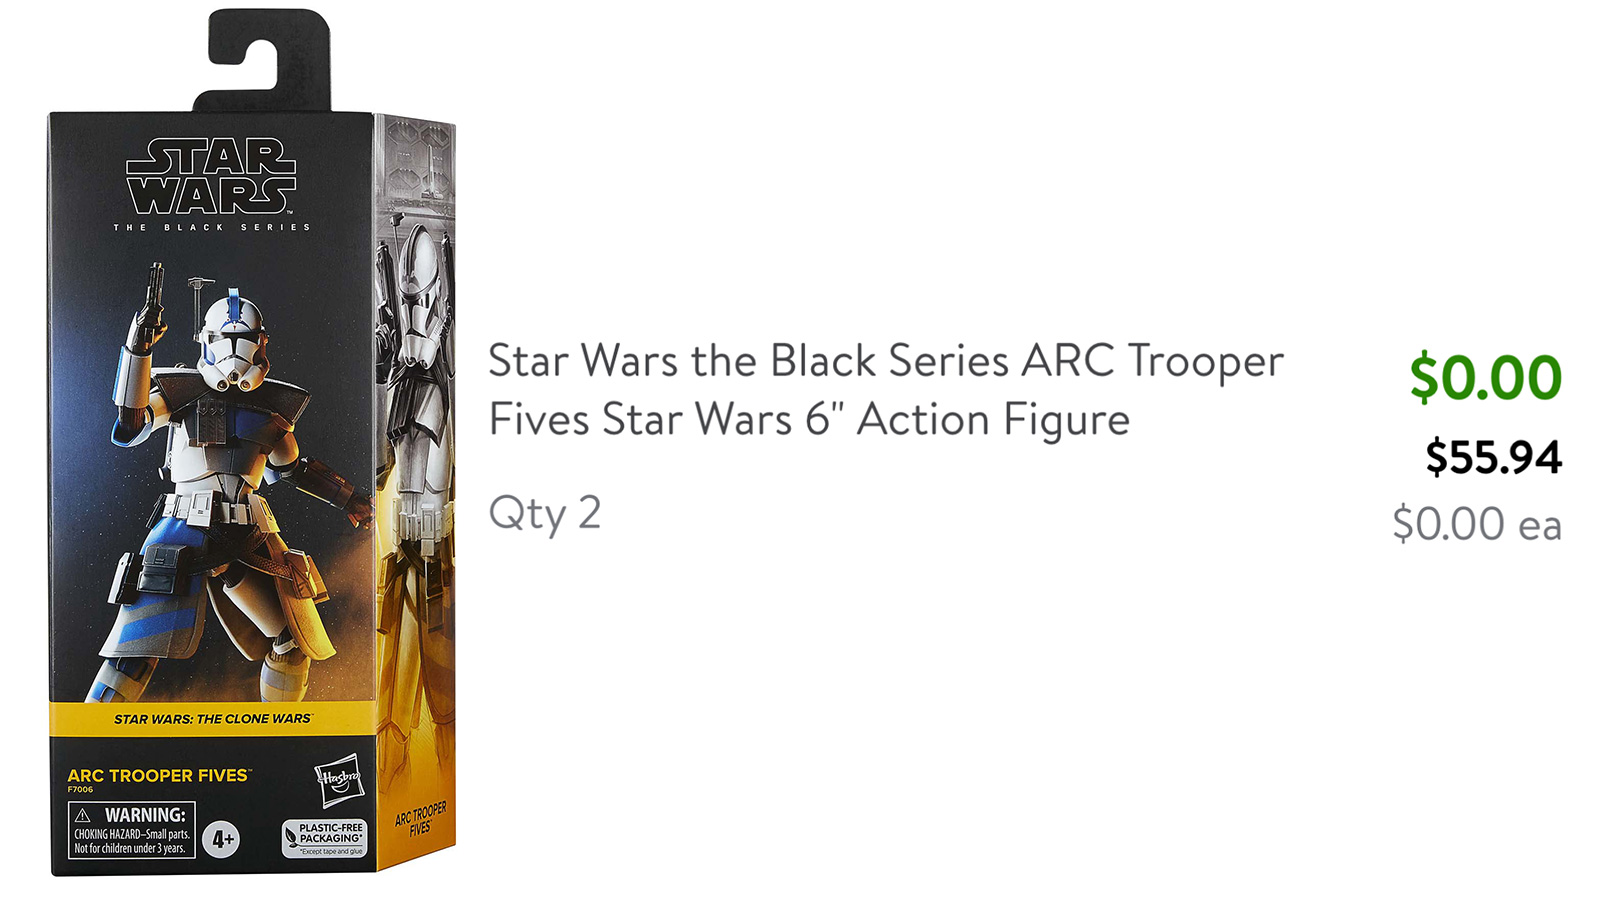 System Error Or Cancellations Coming For Walmart’s Exclusive TBS 6-Inch ARC Trooper Fives?